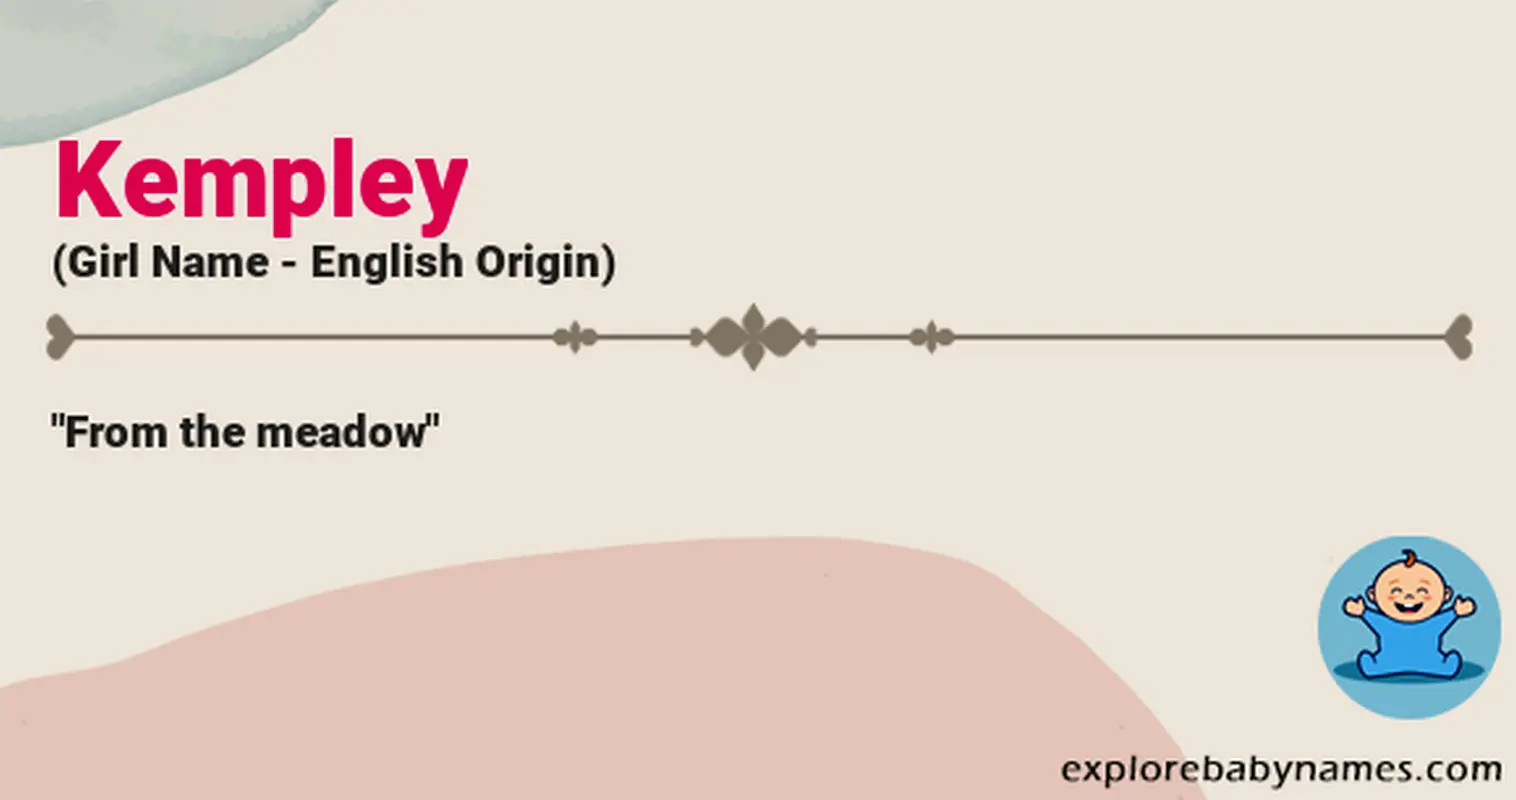 Meaning of Kempley